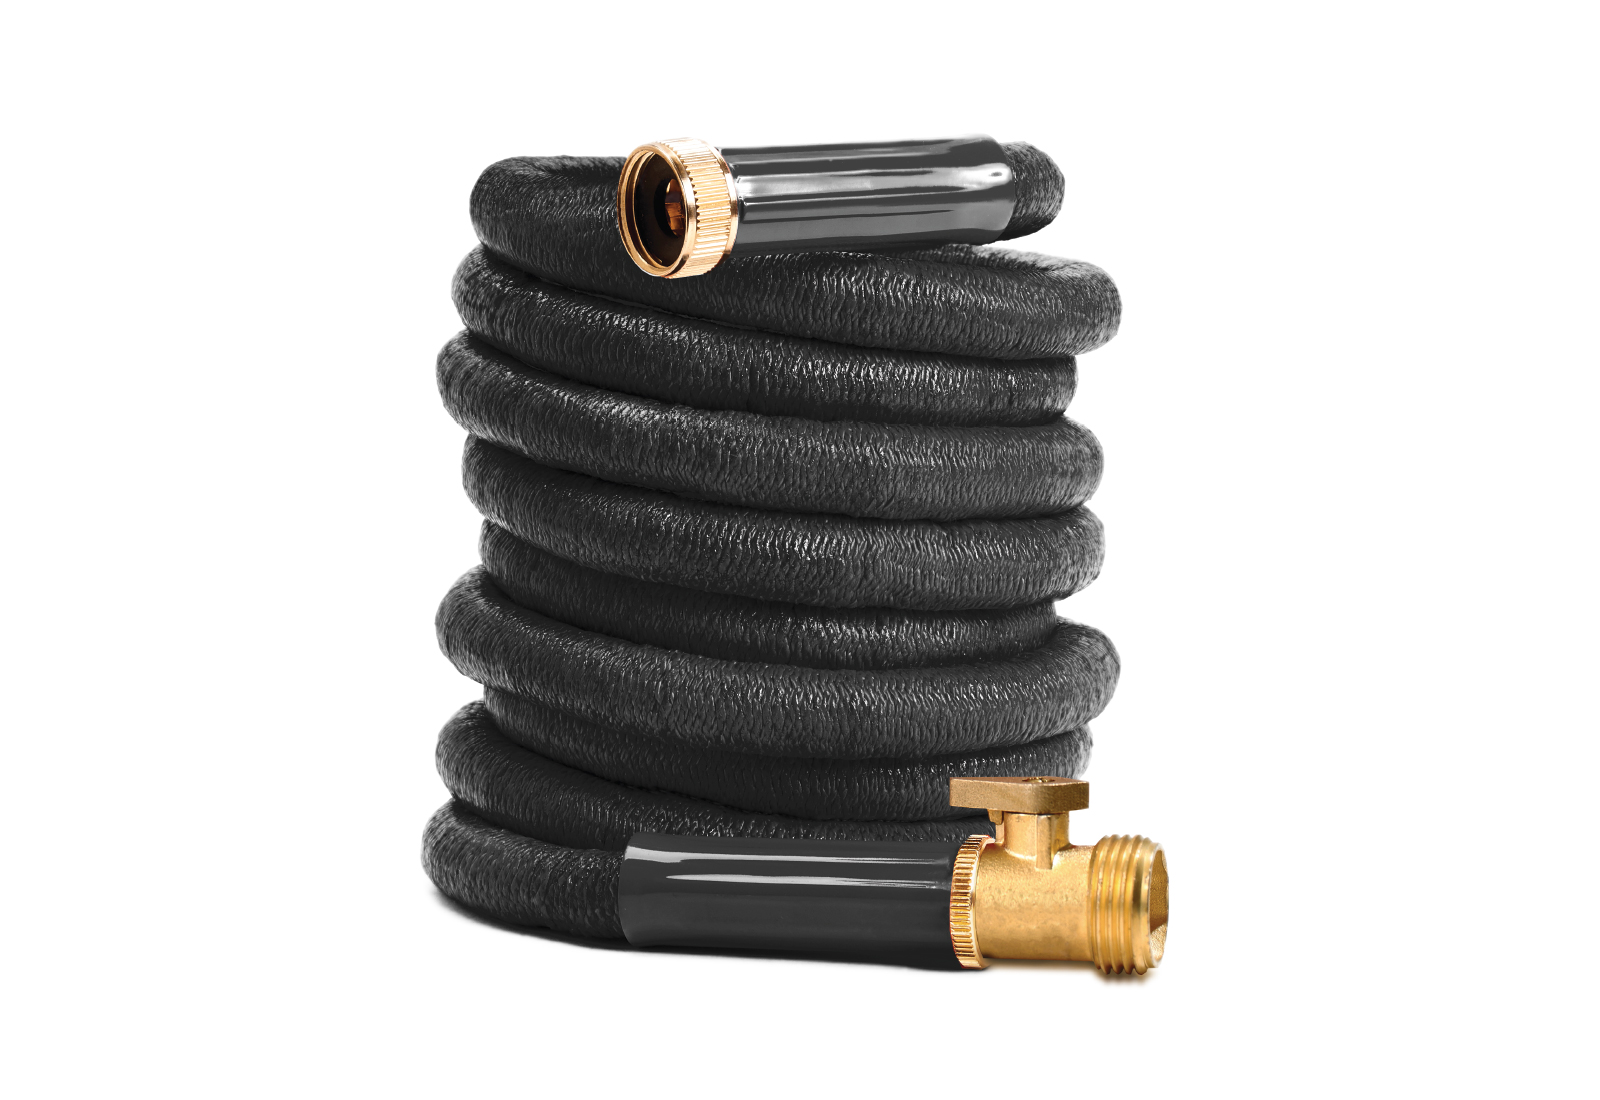 Flex-Able Bungee Hose Product Image